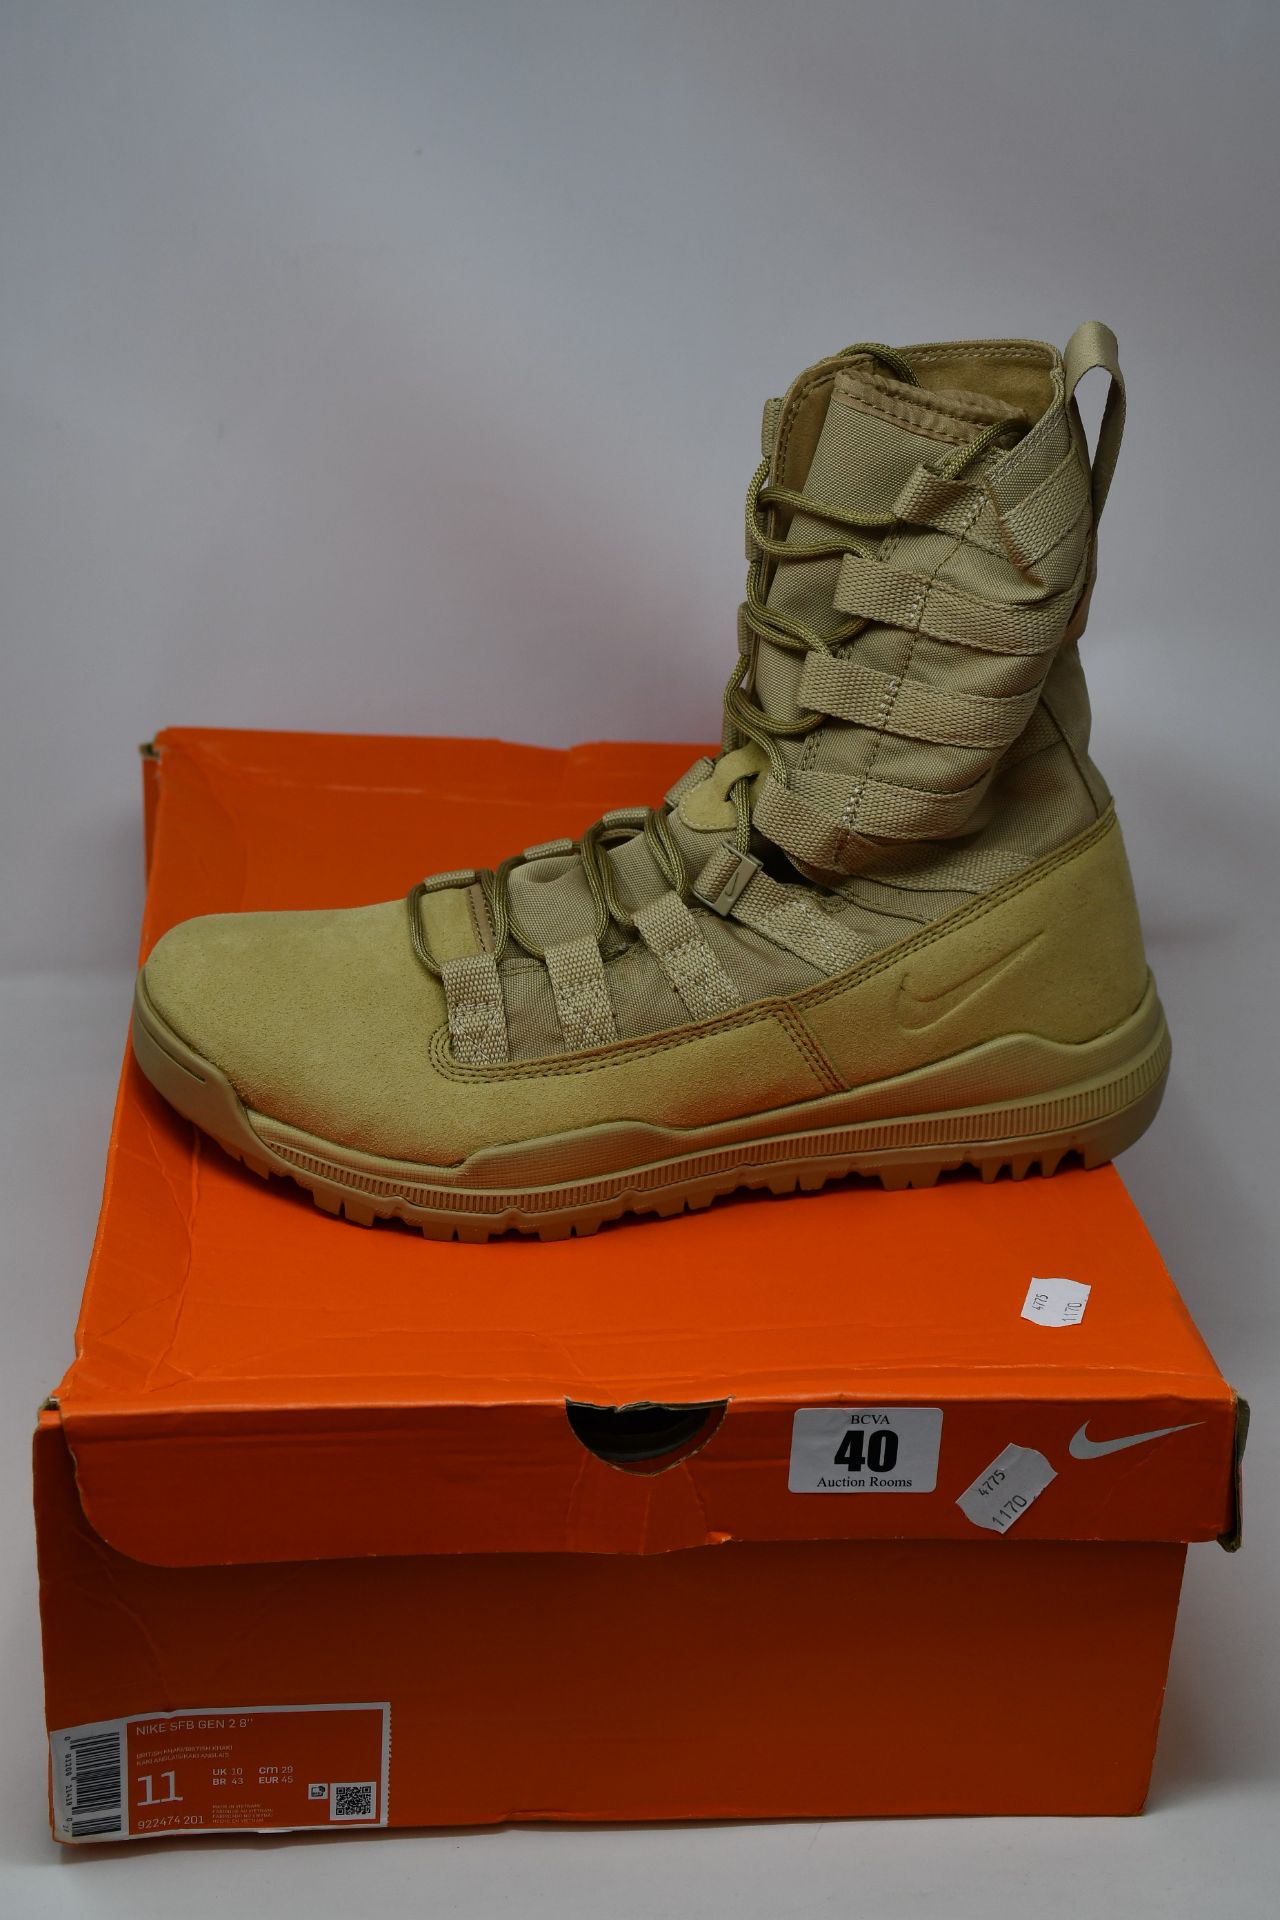 A pair of as new Nike SFB Gen 2 8" boots (UK 10).